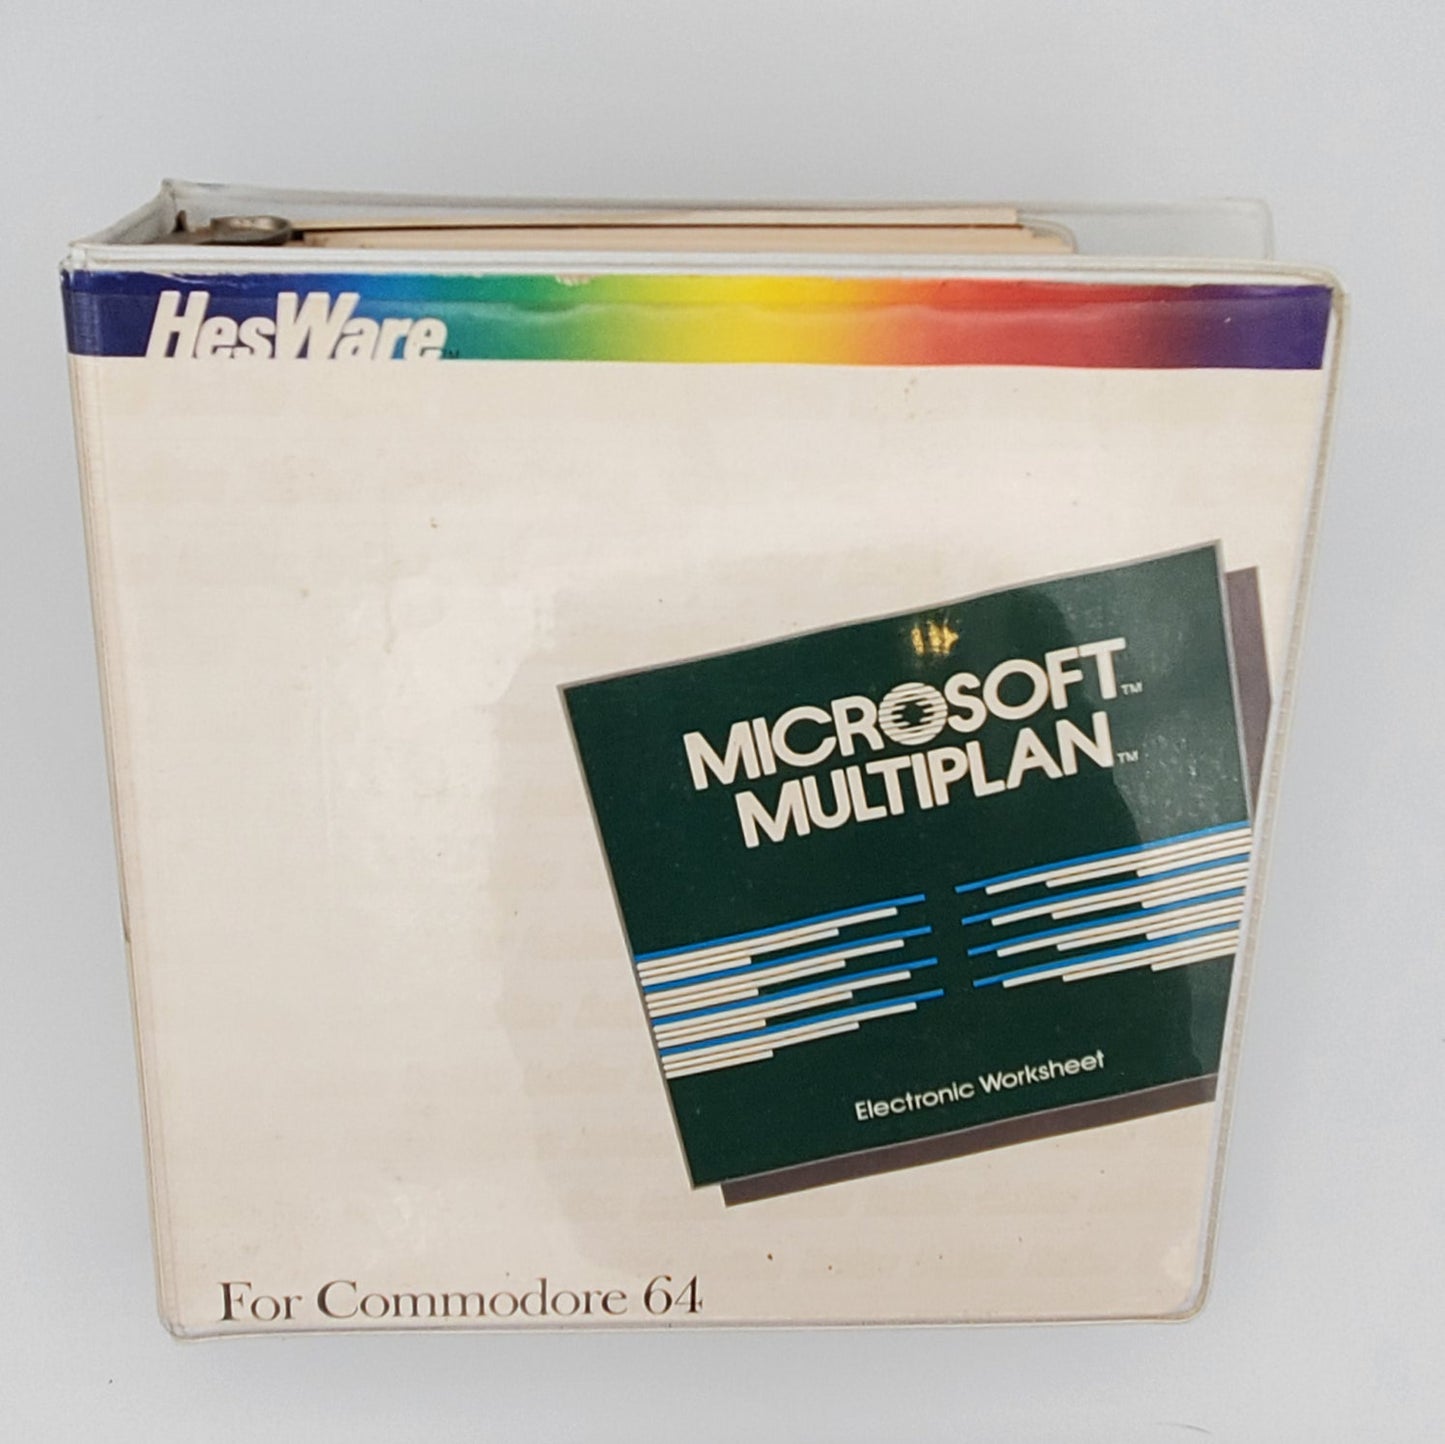 Microsoft Multiplan from HesWare for the Commodore 64 - Ver. 1.07